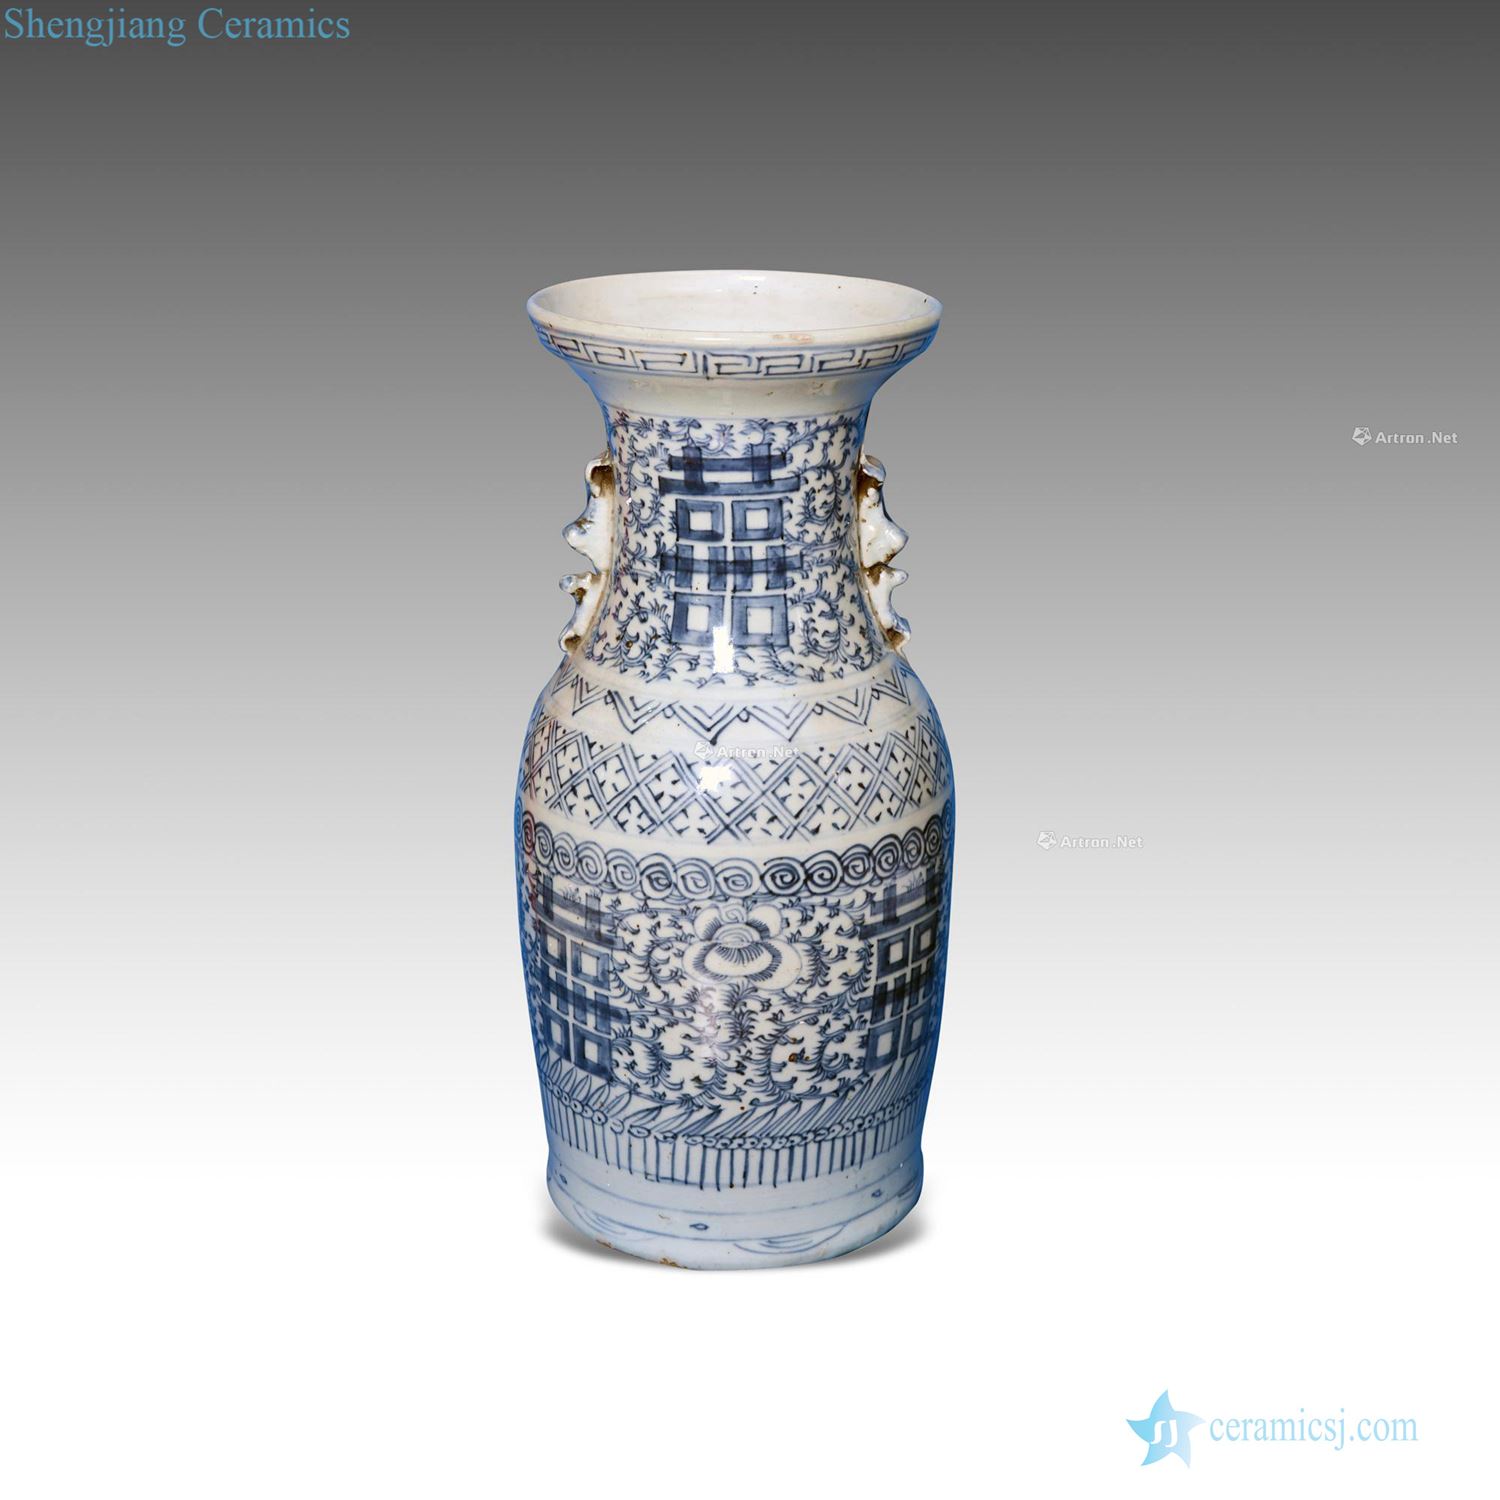 In the qing dynasty Blue and white dowry bottle